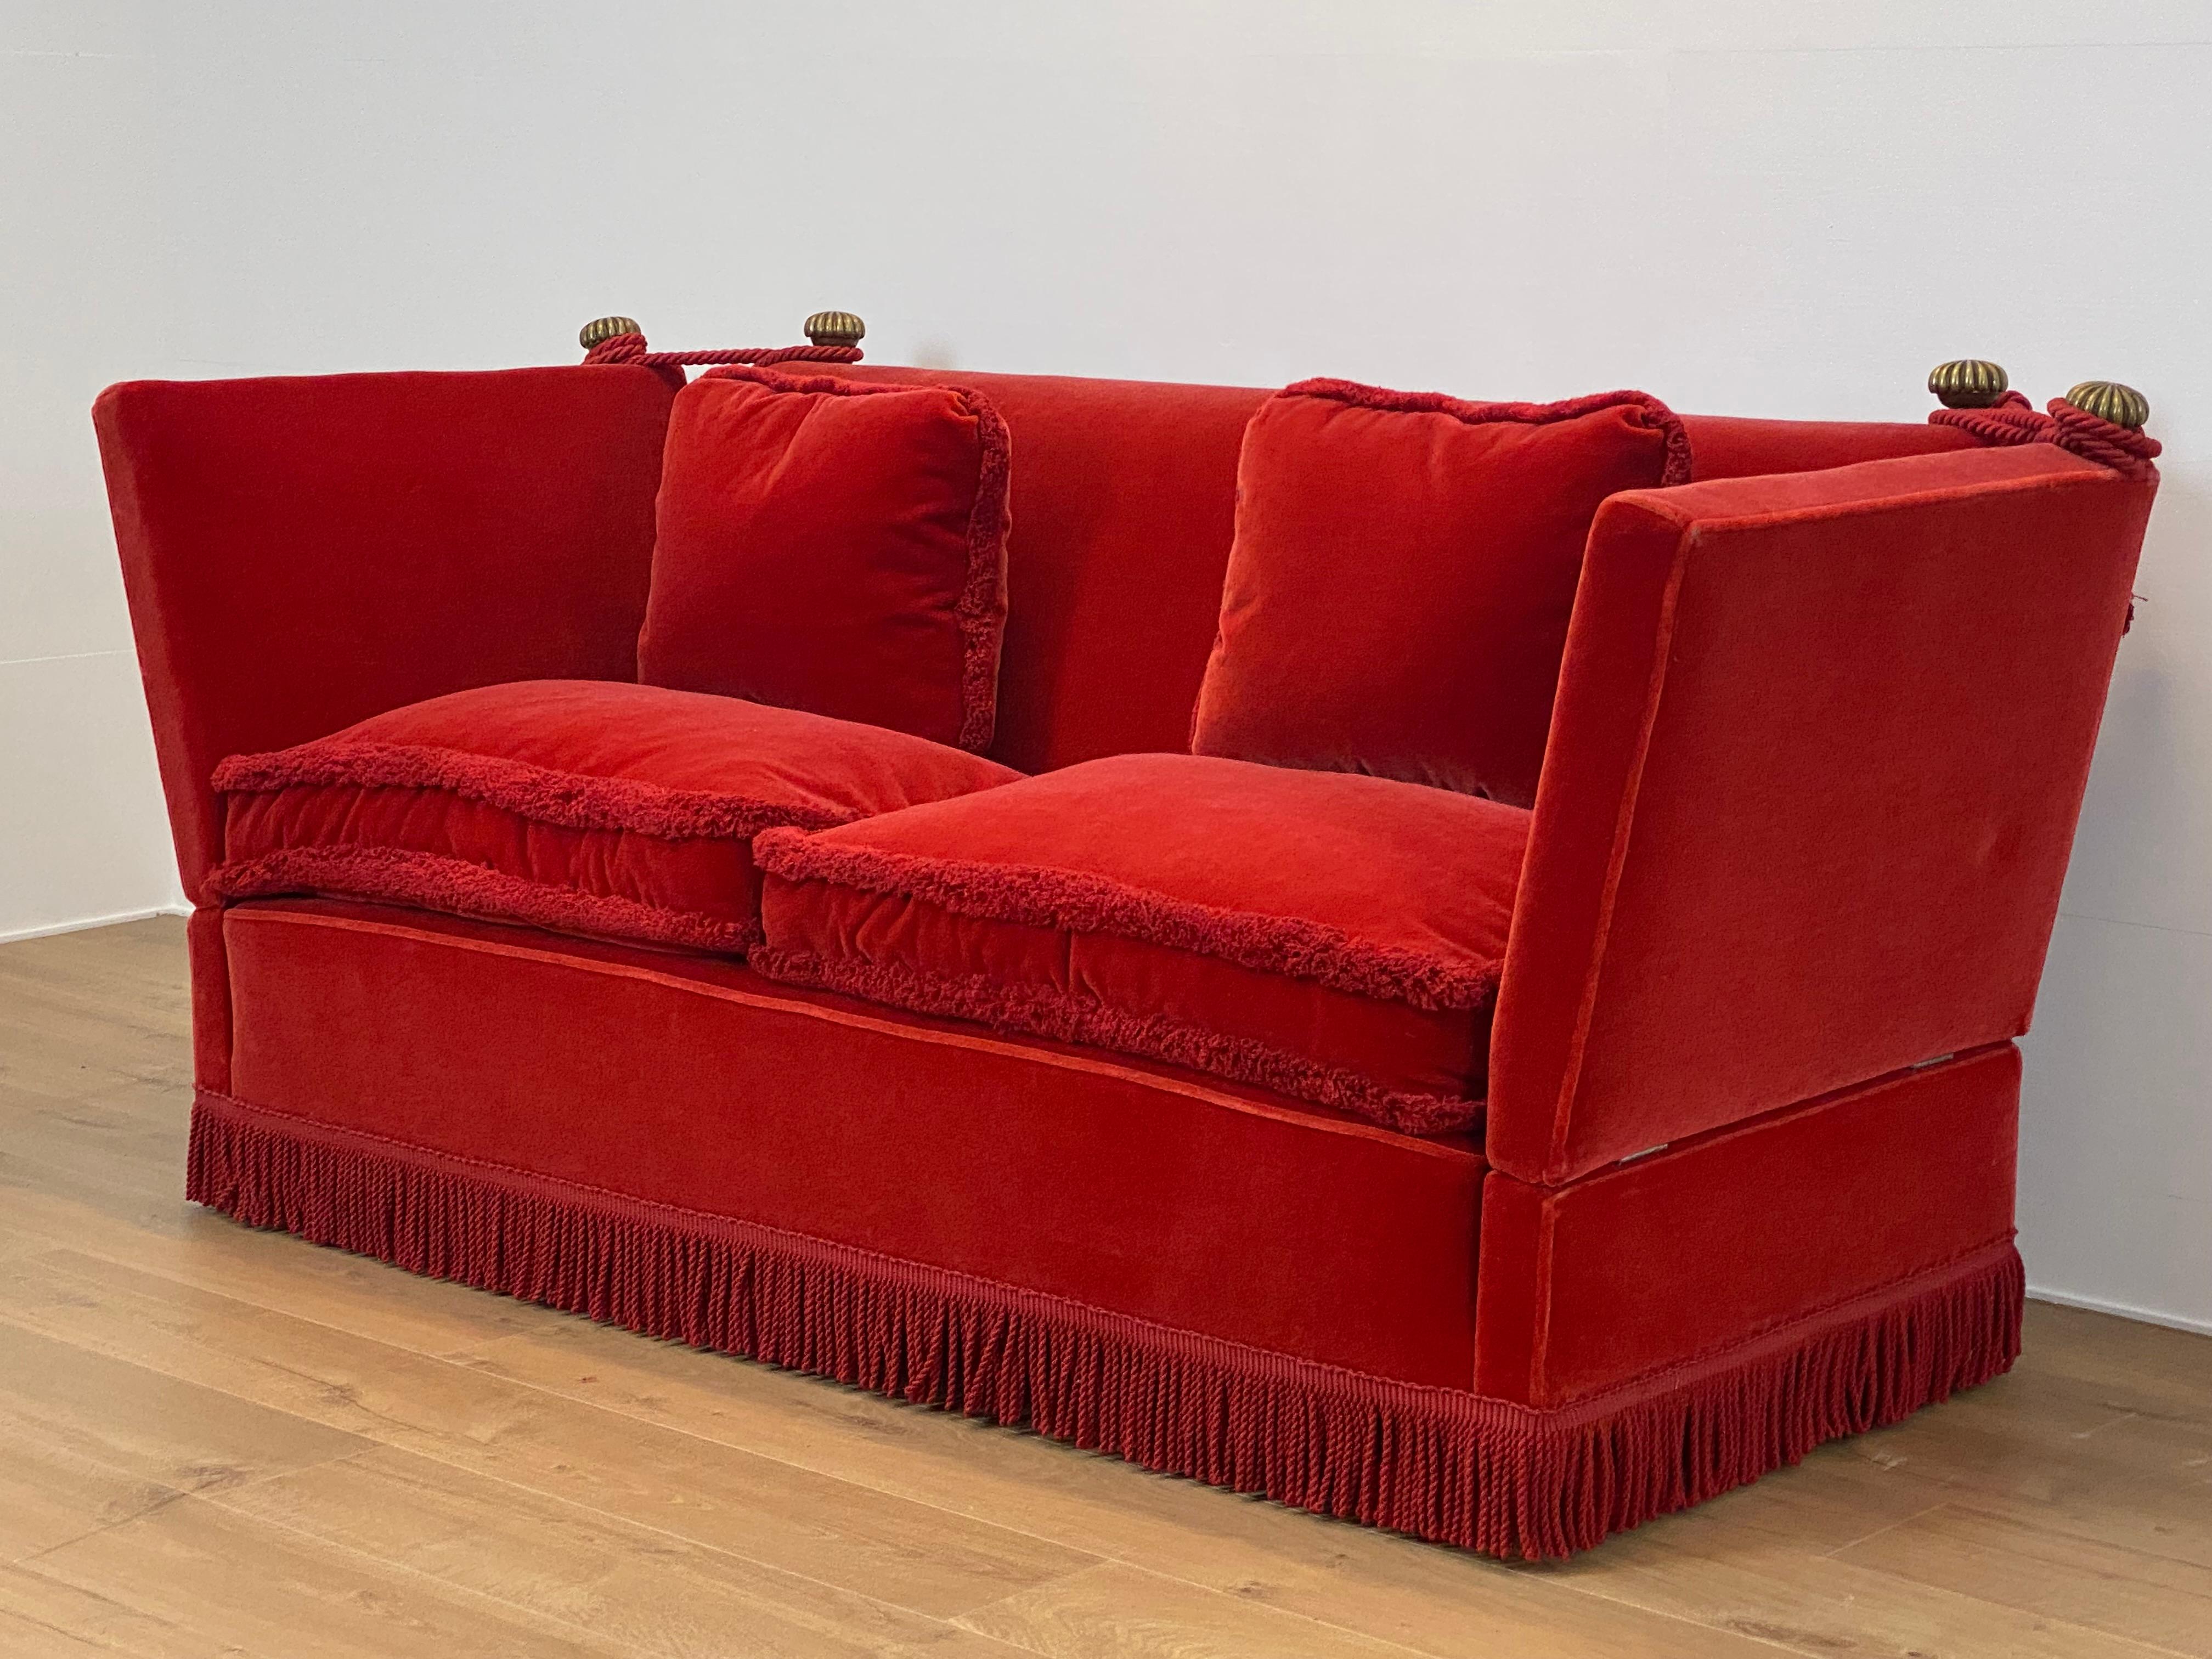 Drop Arm Knoll Style Sofa in an Orange-Red Velvet In Good Condition For Sale In Schellebelle, BE